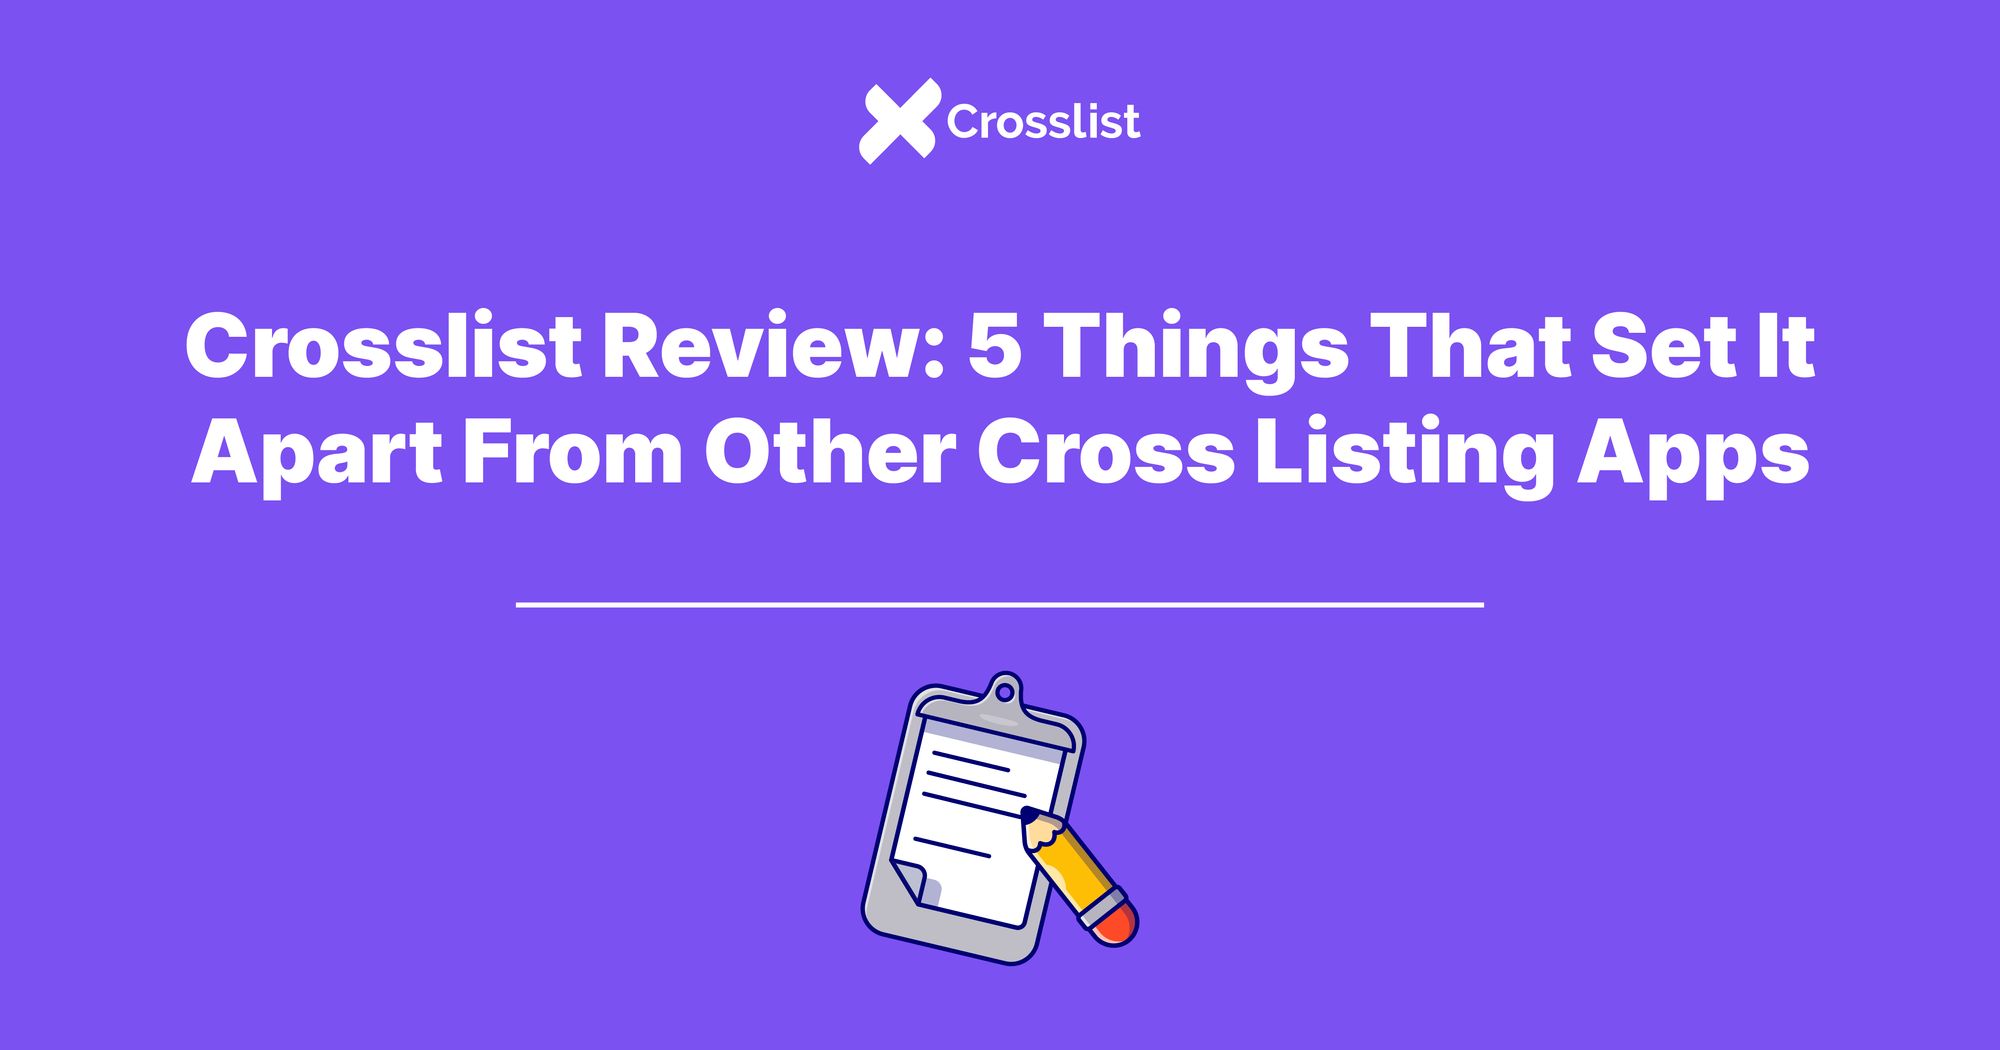 Crosslist Review: 5 Things That Set It Apart From Other Cross Listing Apps